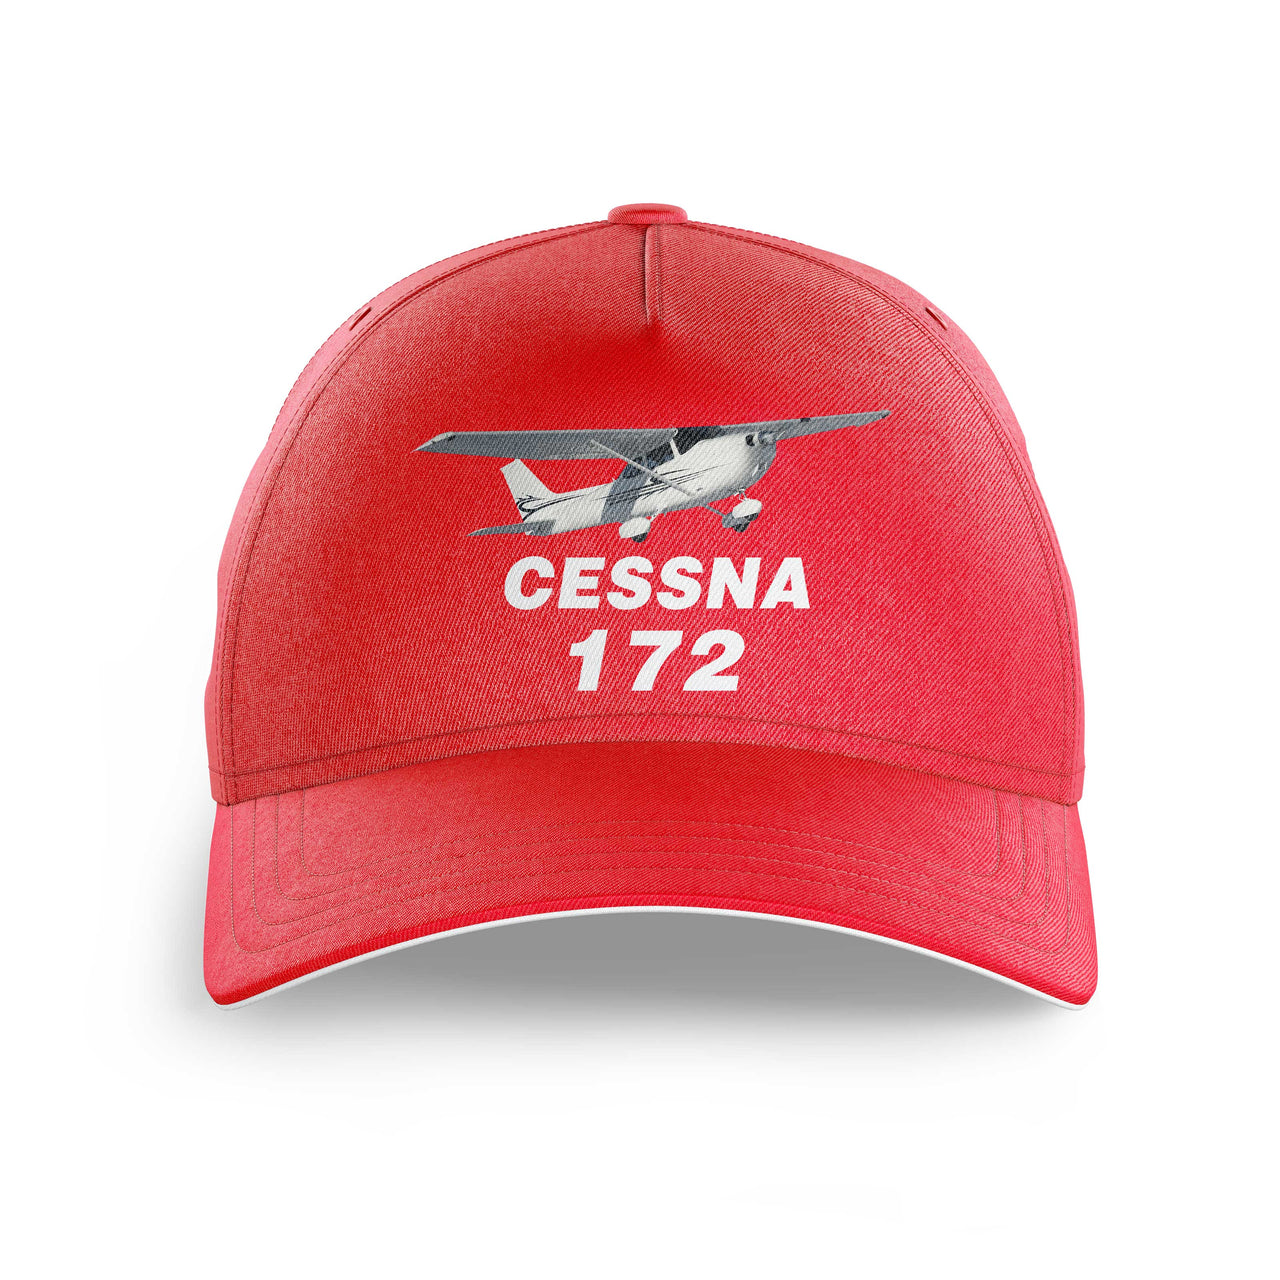 The Cessna 172 Printed Hats